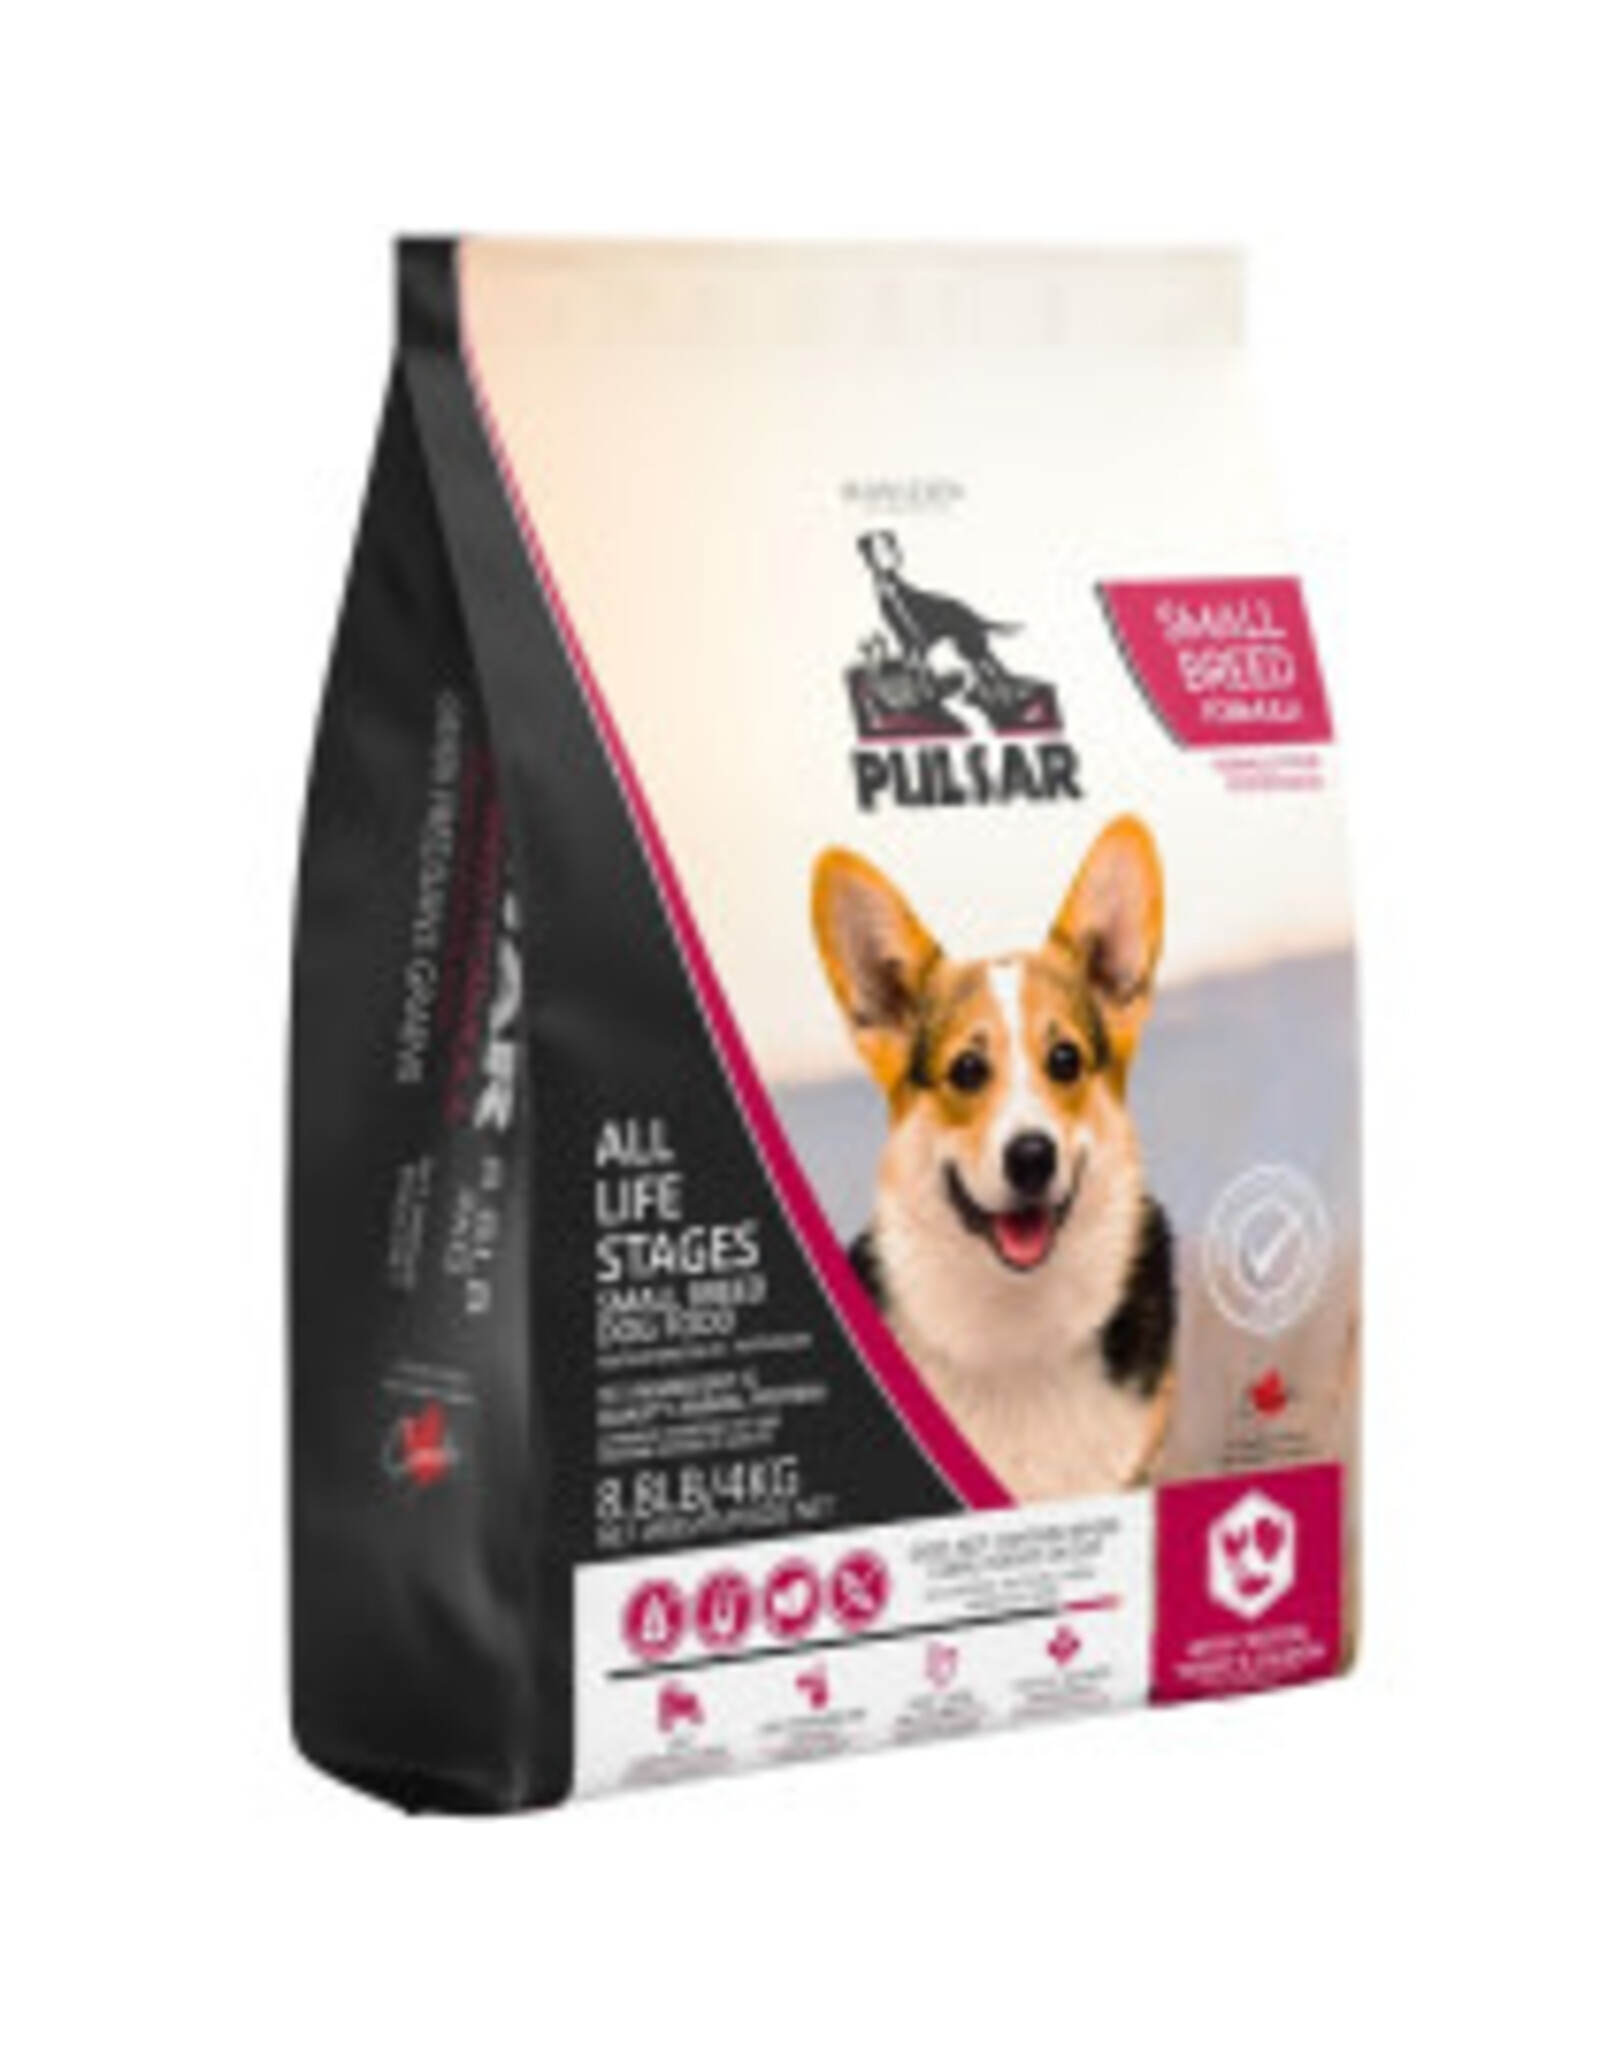 HORIZON PULSAR*Dog Food Small Breed Grain Free - Chicken -  All Life Stages 4kg/8.8lb  - 49283